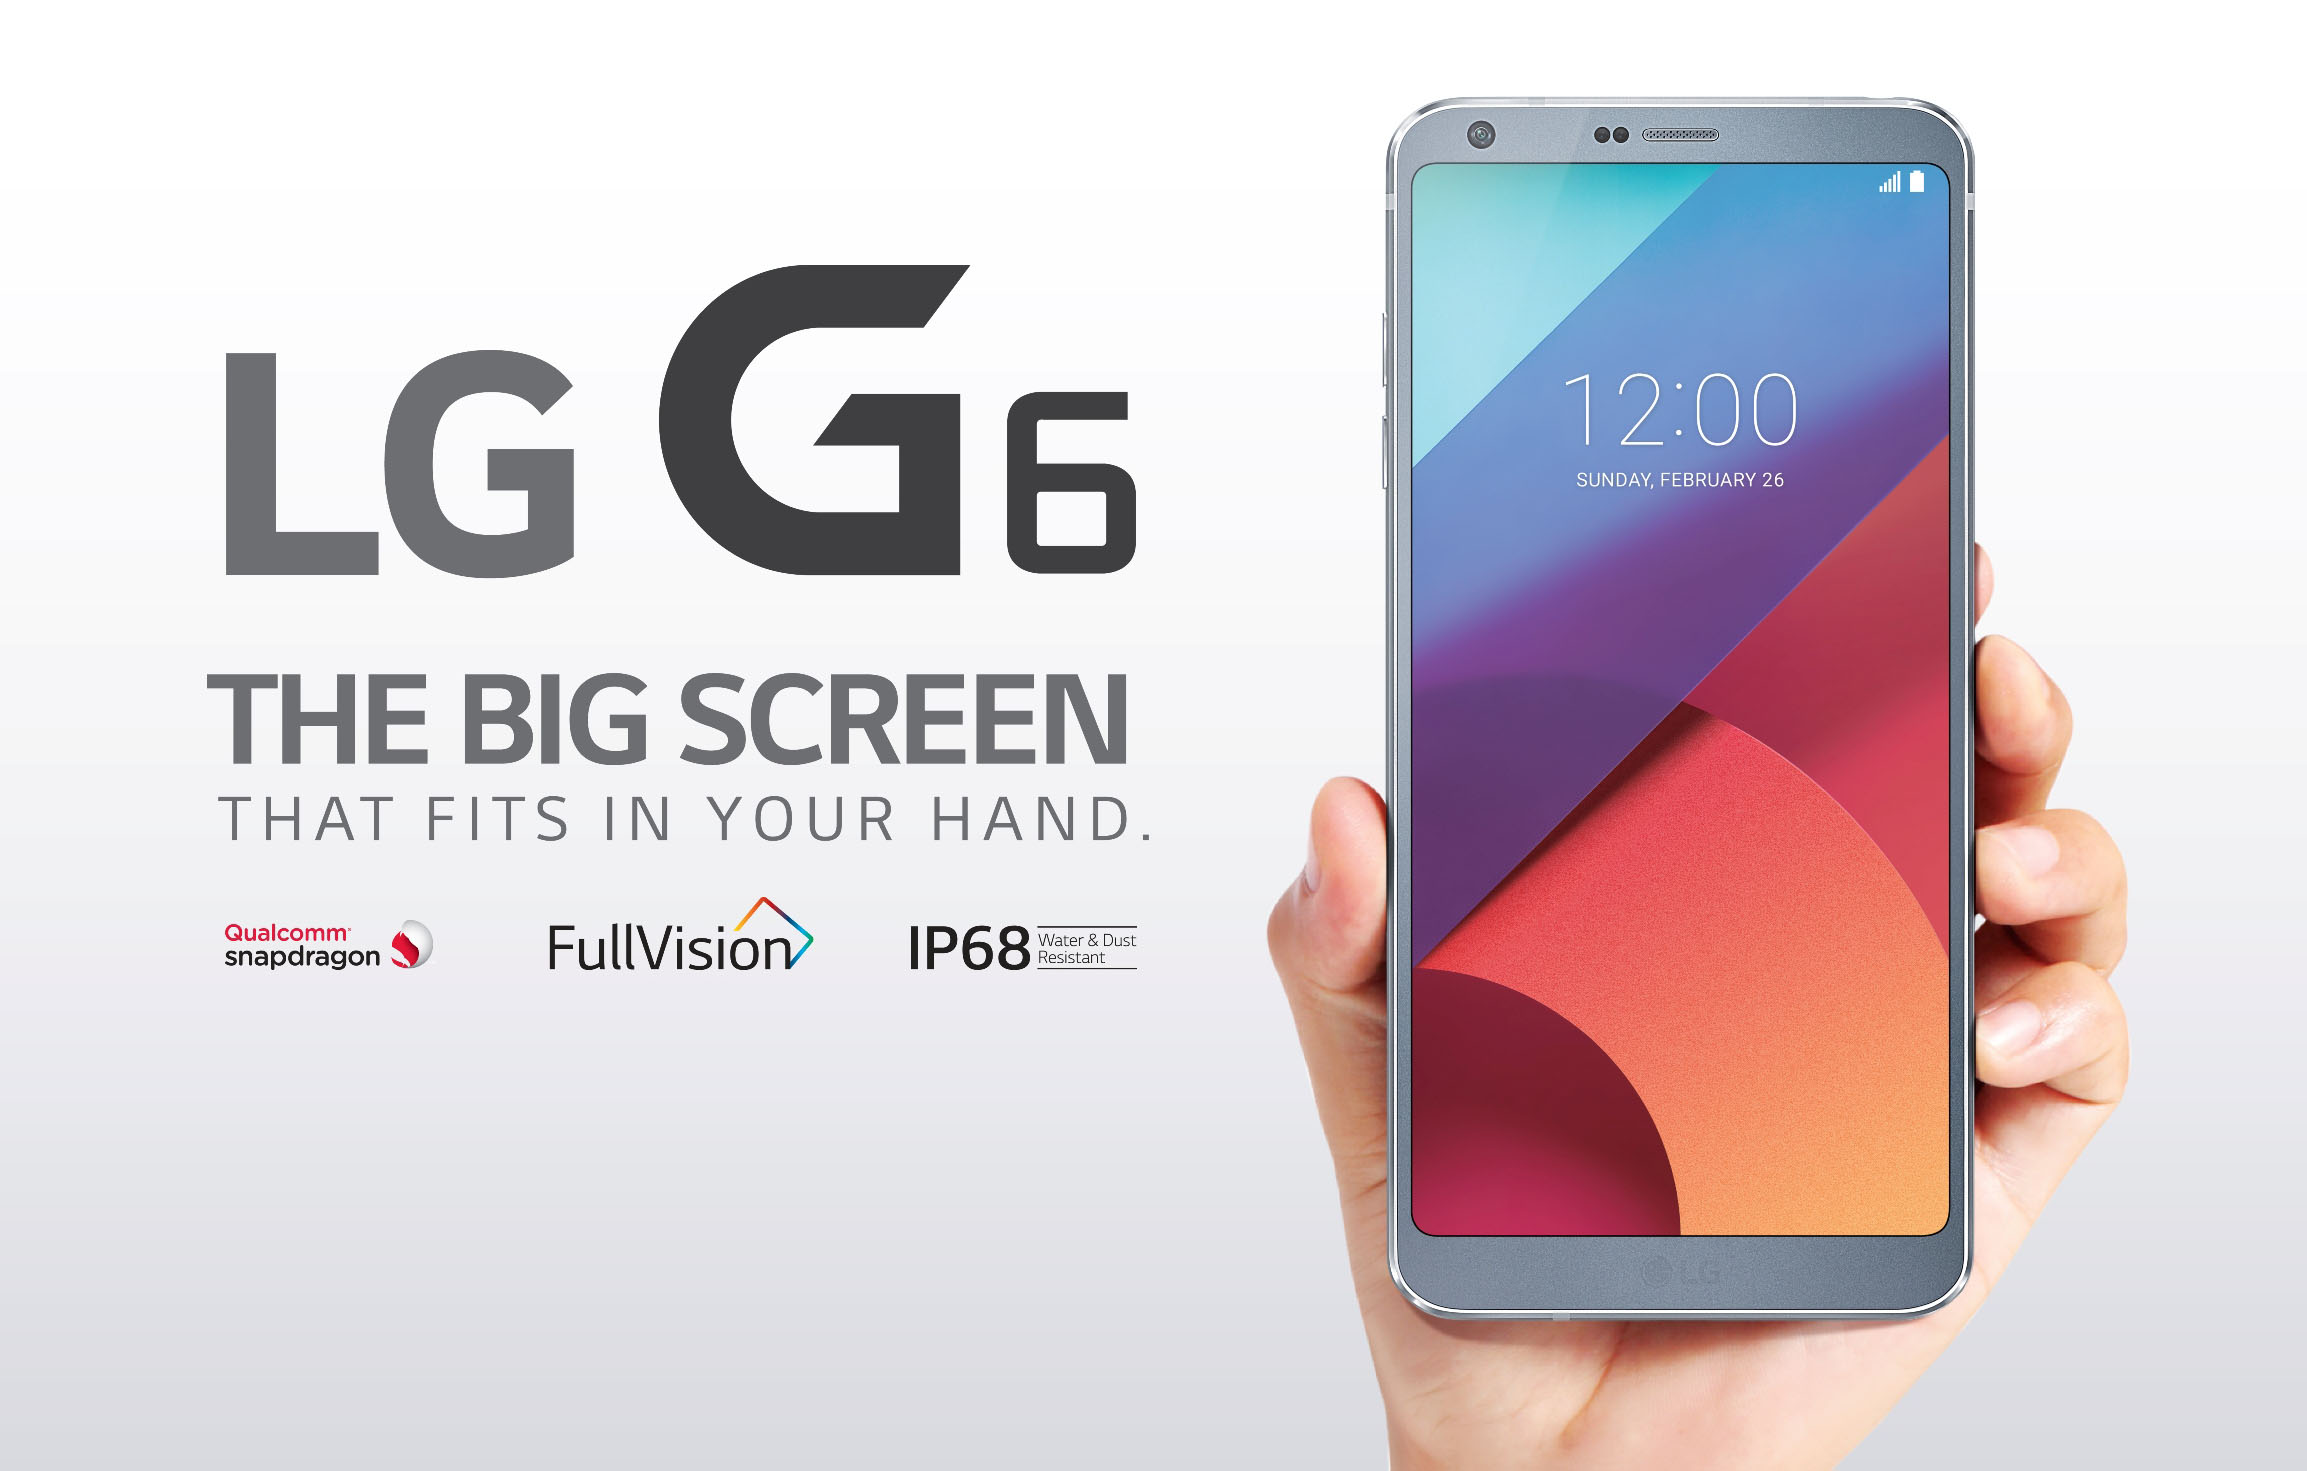 LG G6 now available with Globe Plan 1499